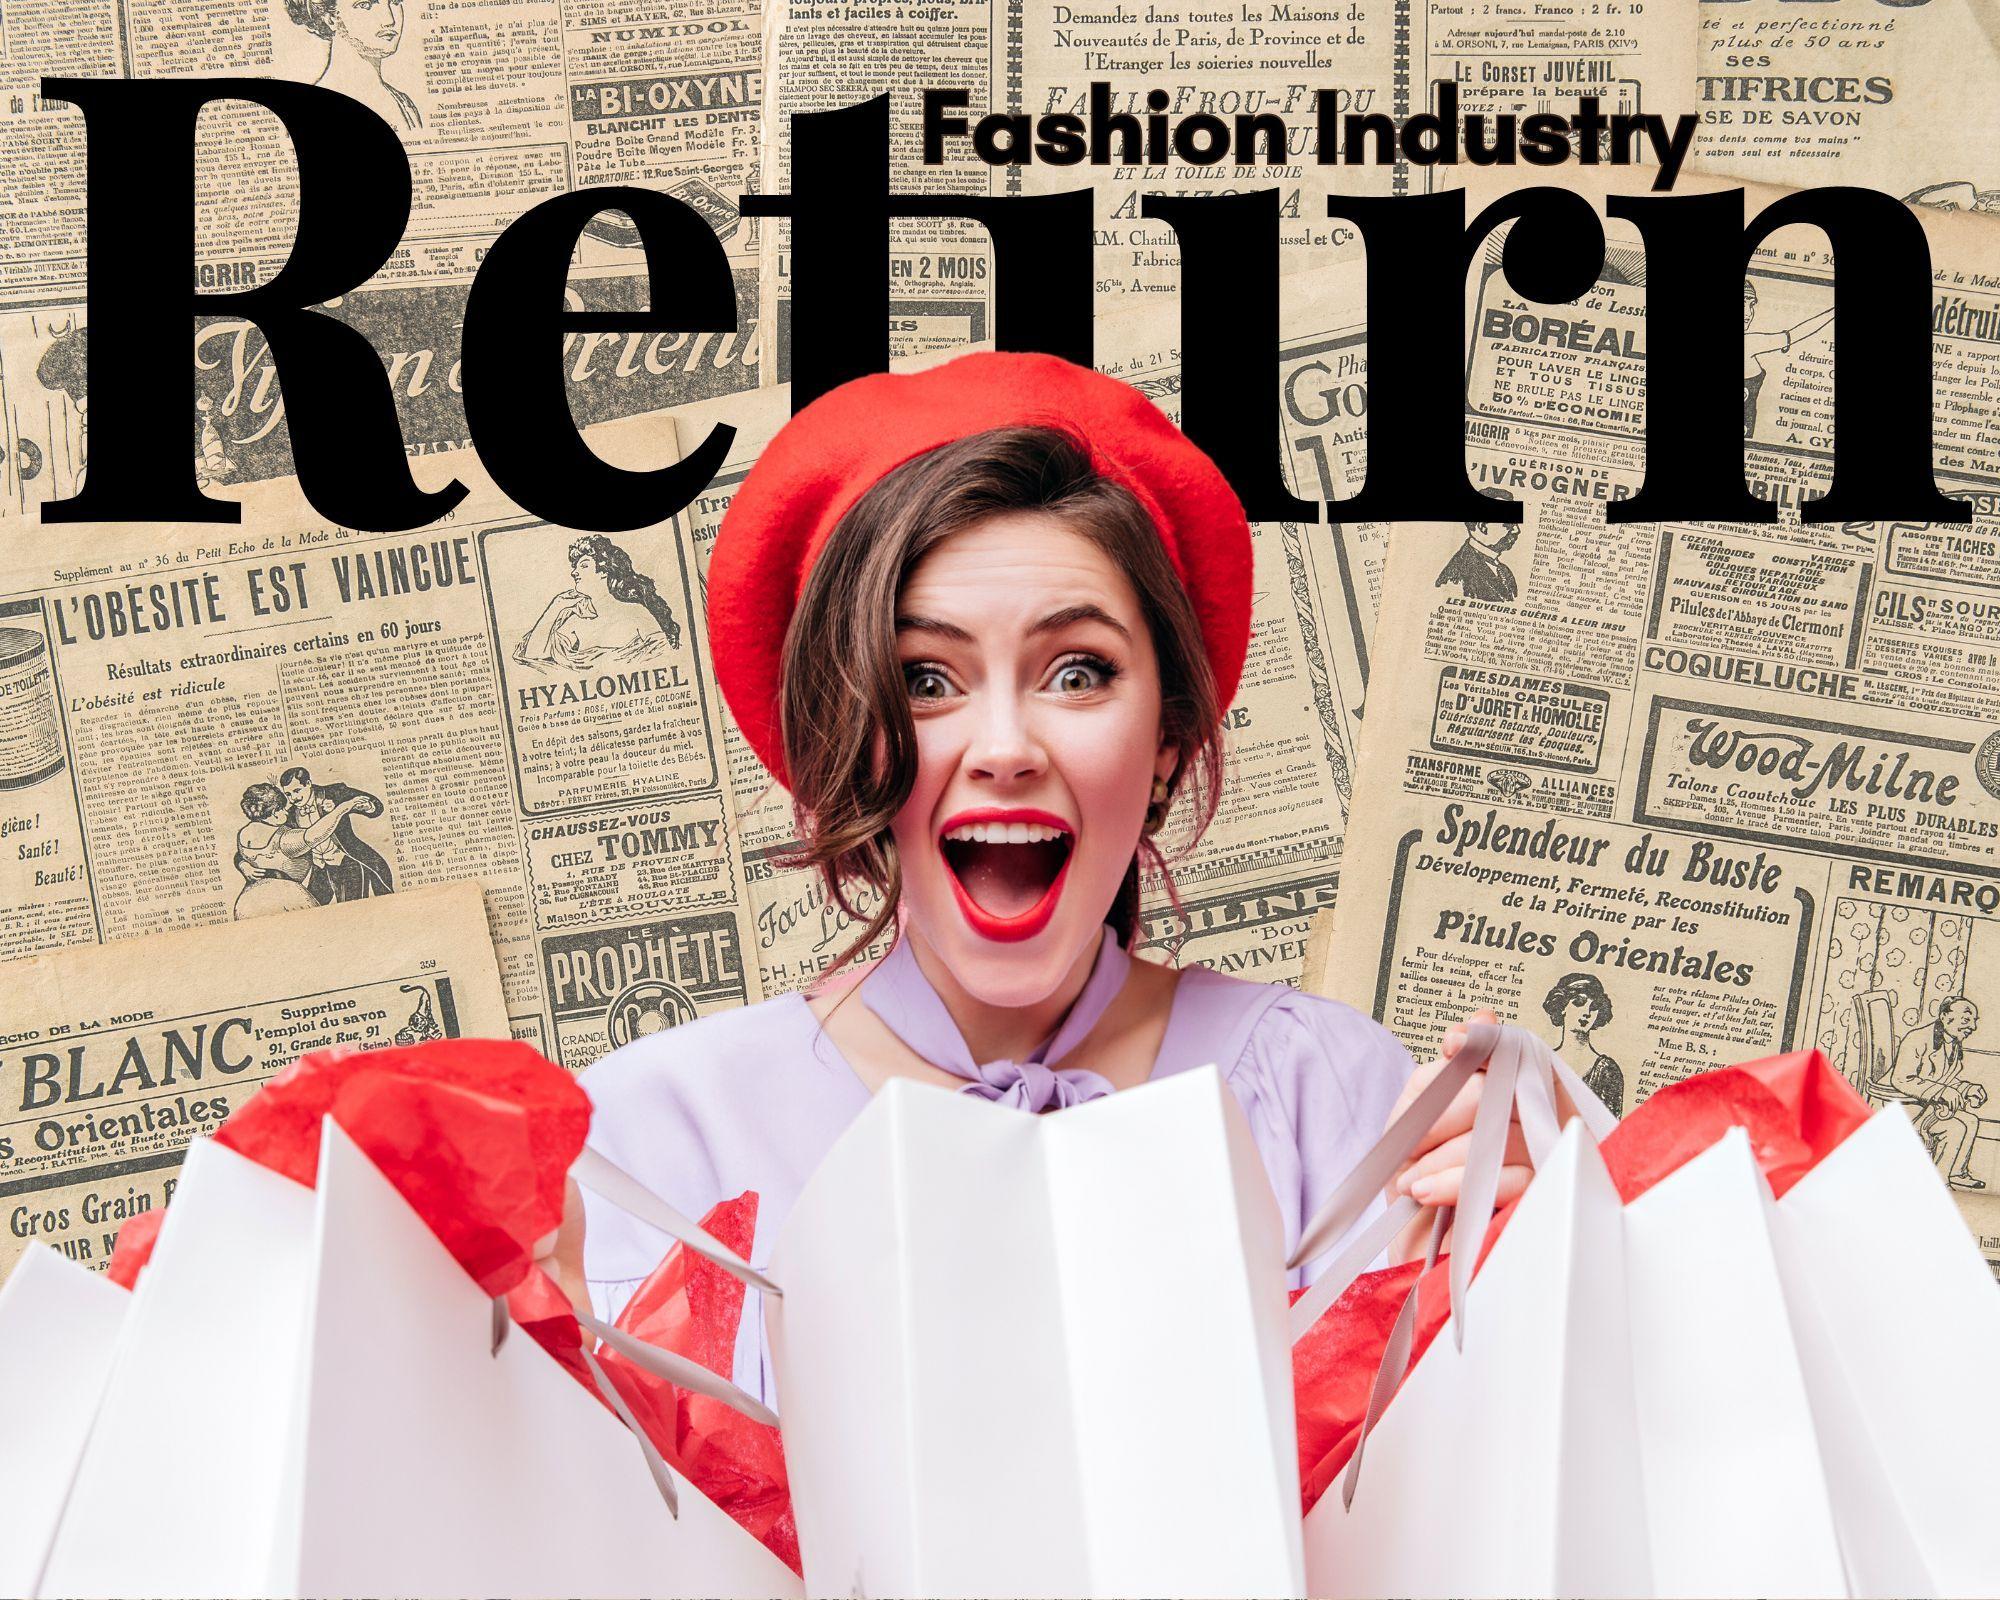 return rate in fashion industry, what are the main causes of return in clothes online shopping